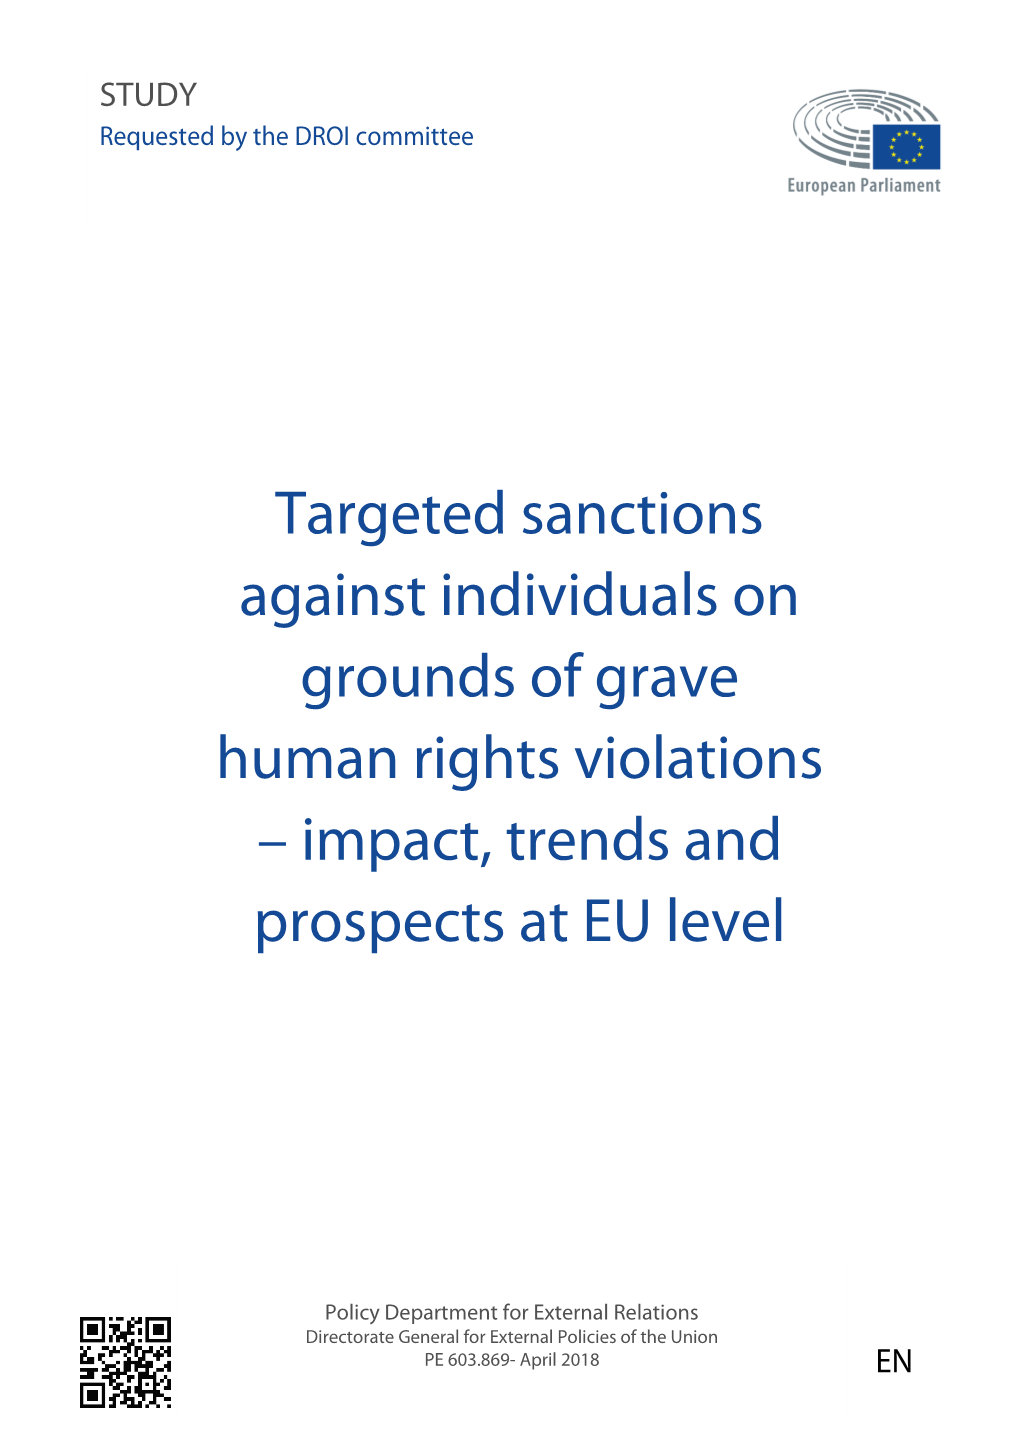 Targeted Sanctions Against Individuals on Grounds of Grave Human Rights Violations – Impact, Trends and Prospects at EU Level